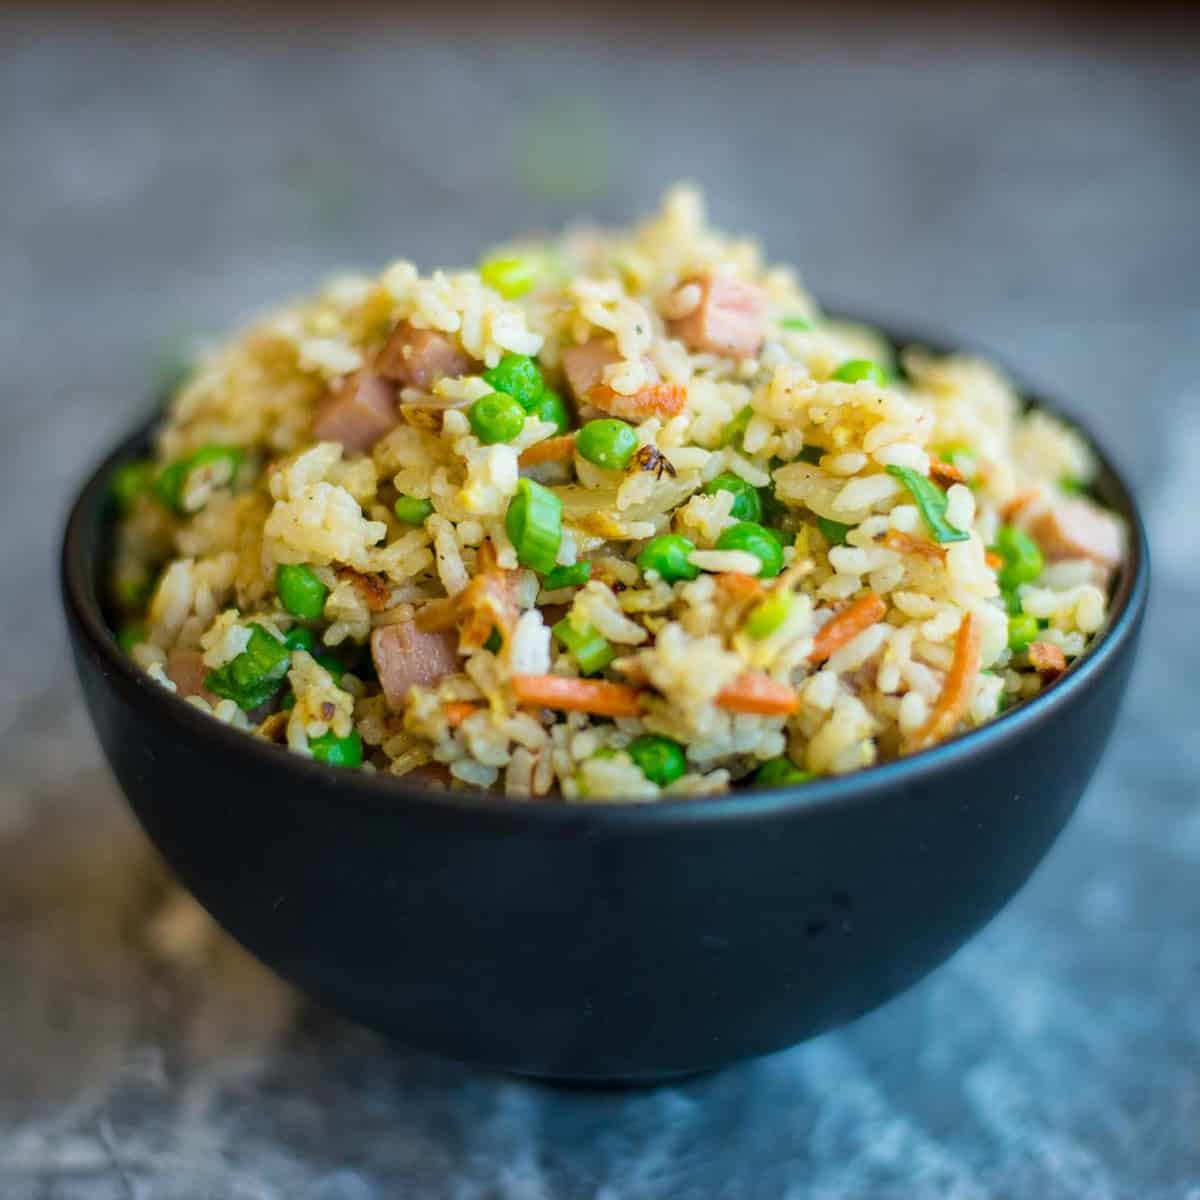 spam fried rice in a black bowl